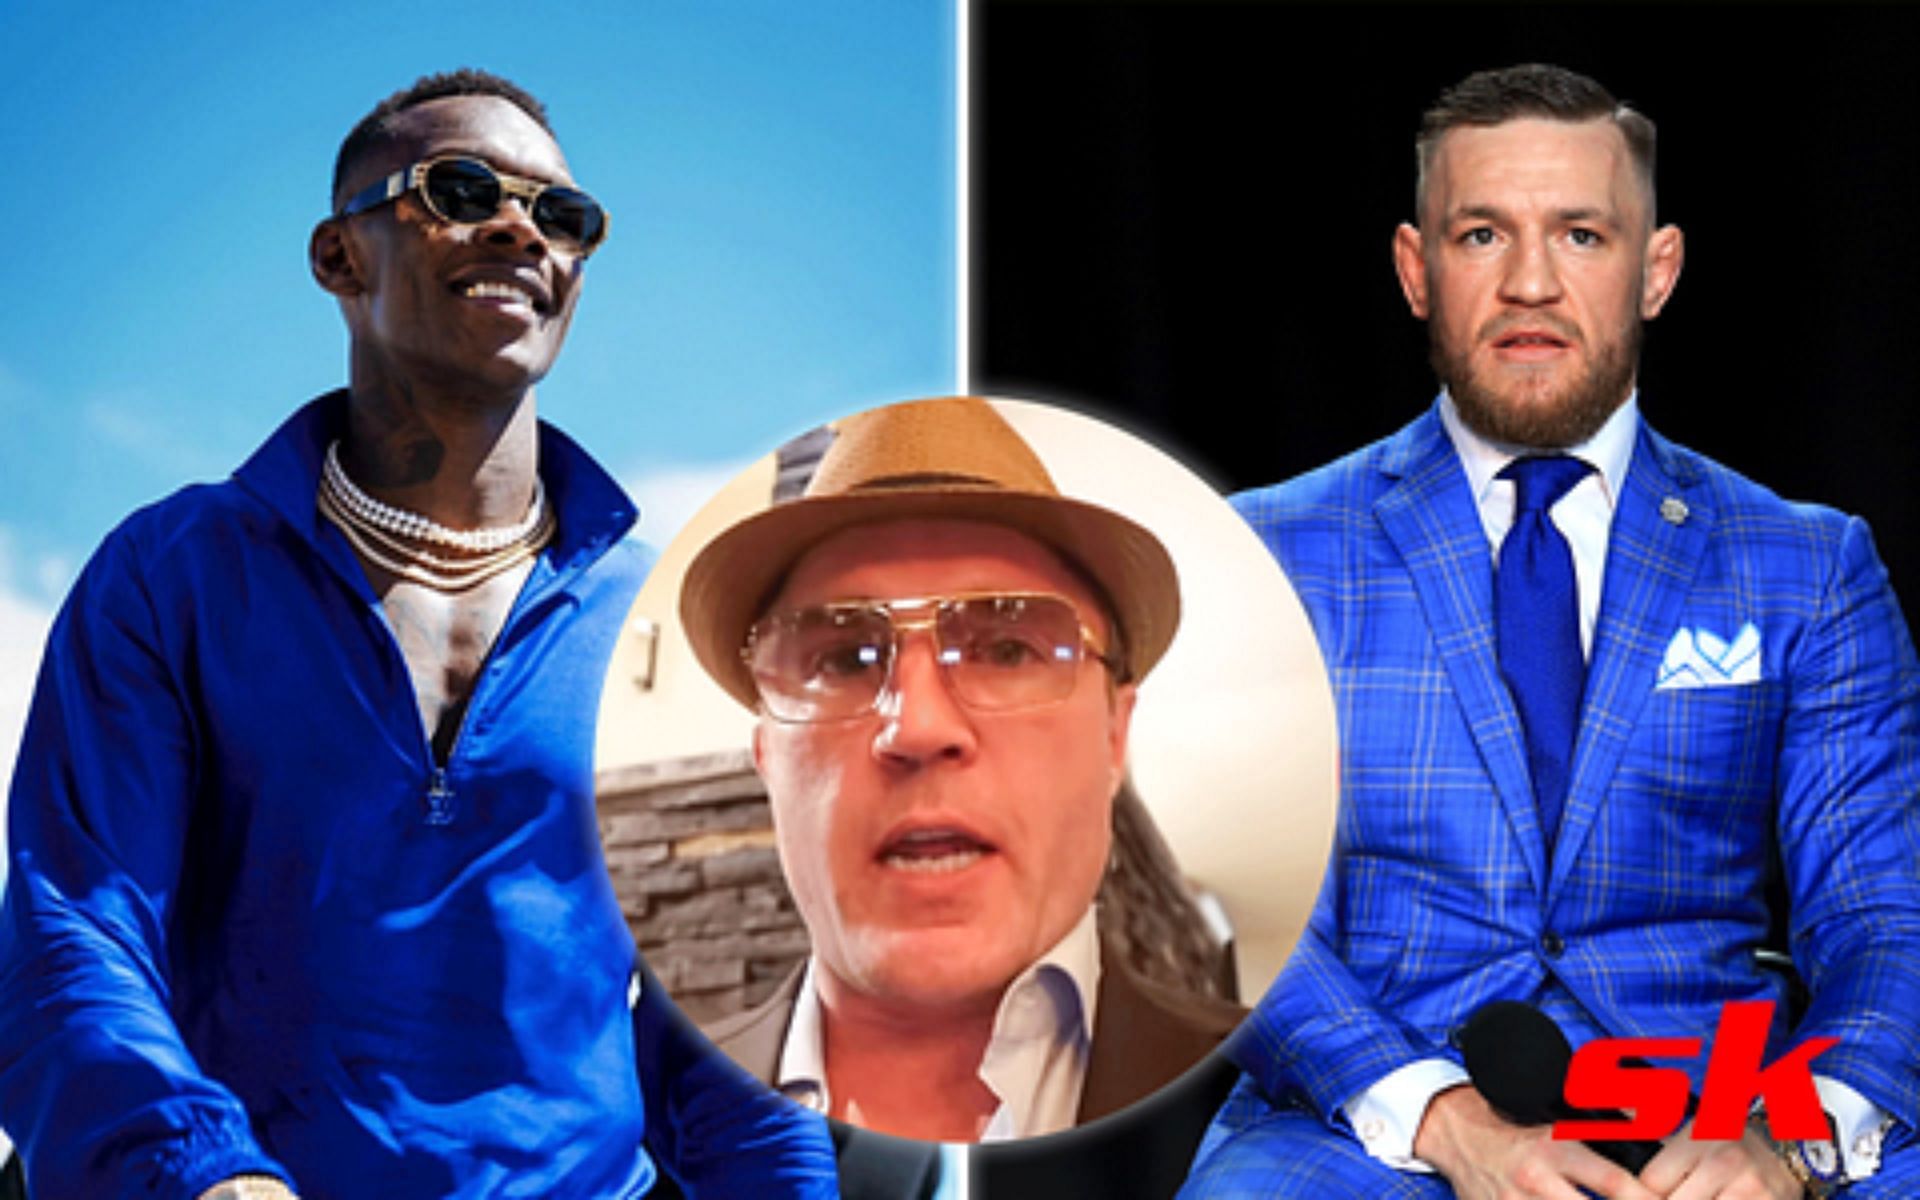 From left to right: Israel Adesanya [image courtesy of @stylebender/Instagram], Chael Sonnen [image courtesy of @sonnench/Instagram], Conor McGregor